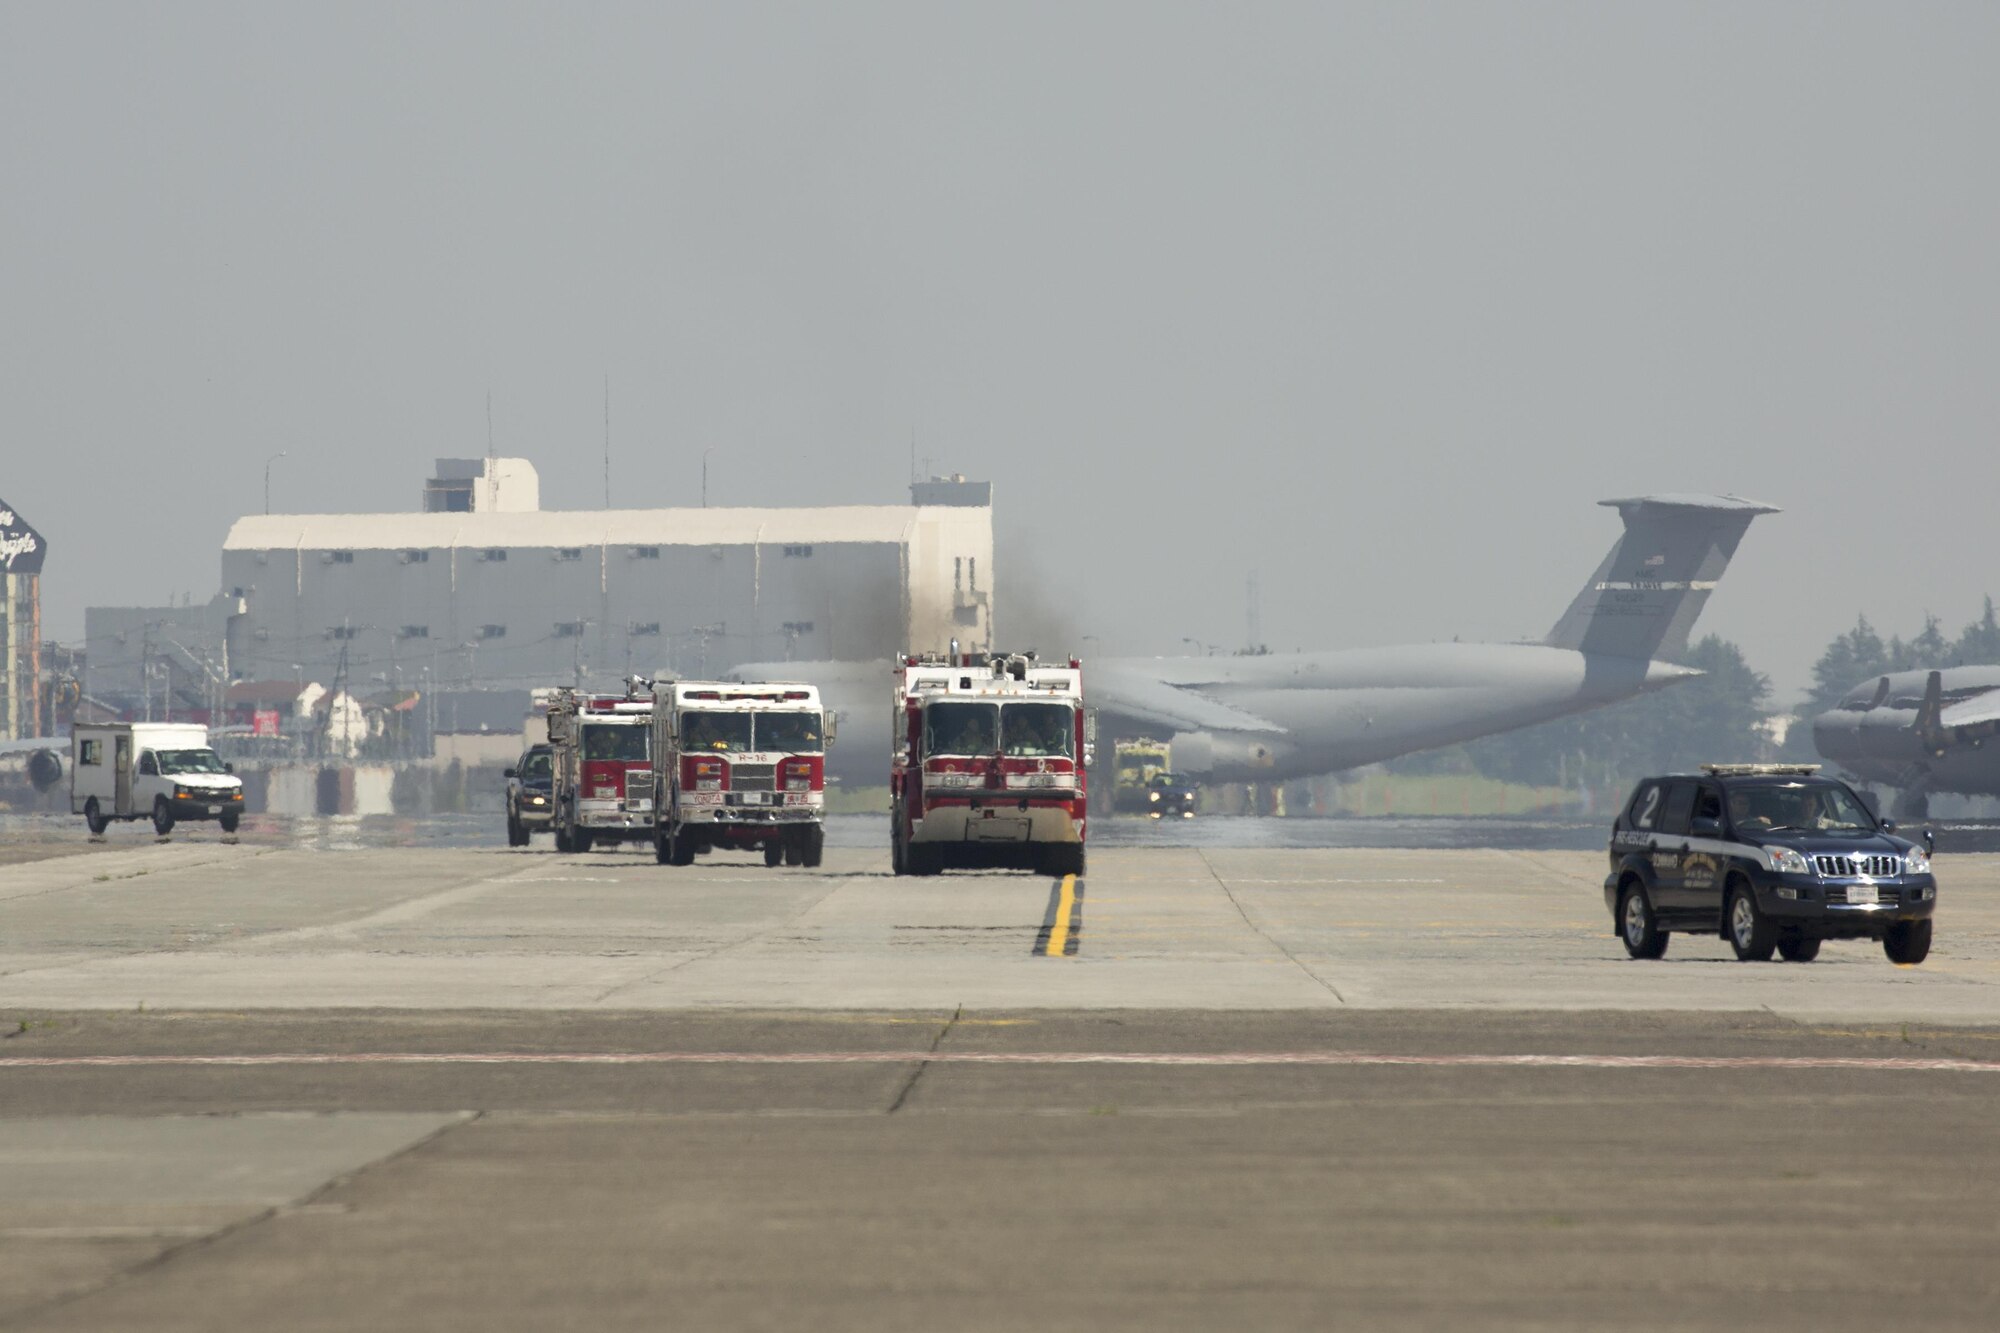 Yokota first responders respond to a simulated aircraft clash site at Yokota Air Base, Japan, July 13, 2015, during an Emergency Management Exercise. The EME prepared Yokota for possible real-world situations requiring response and communication between base organisations. (U.S. Air Force photo by Osakabe Yasuo/Released)
